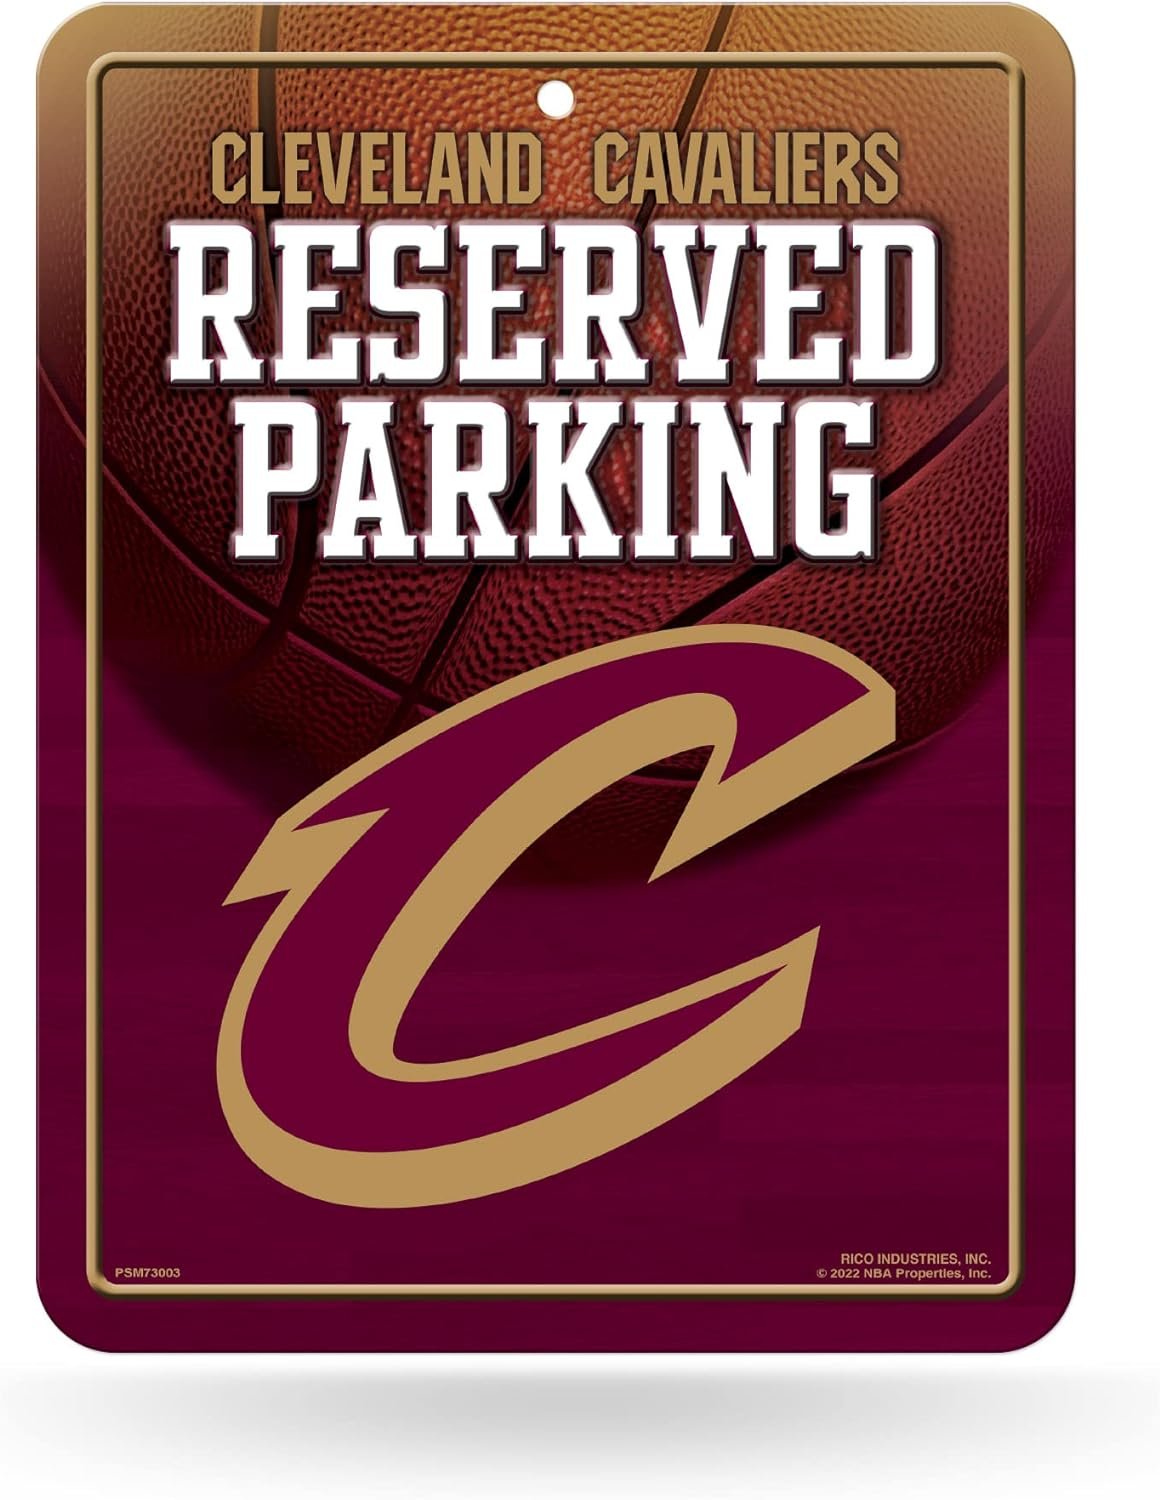 Cleveland Cavaliers Metal Wall Parking Sign, 8.5x11 Inch, Great for Man Cave, Bed Room, Office, Home Decor